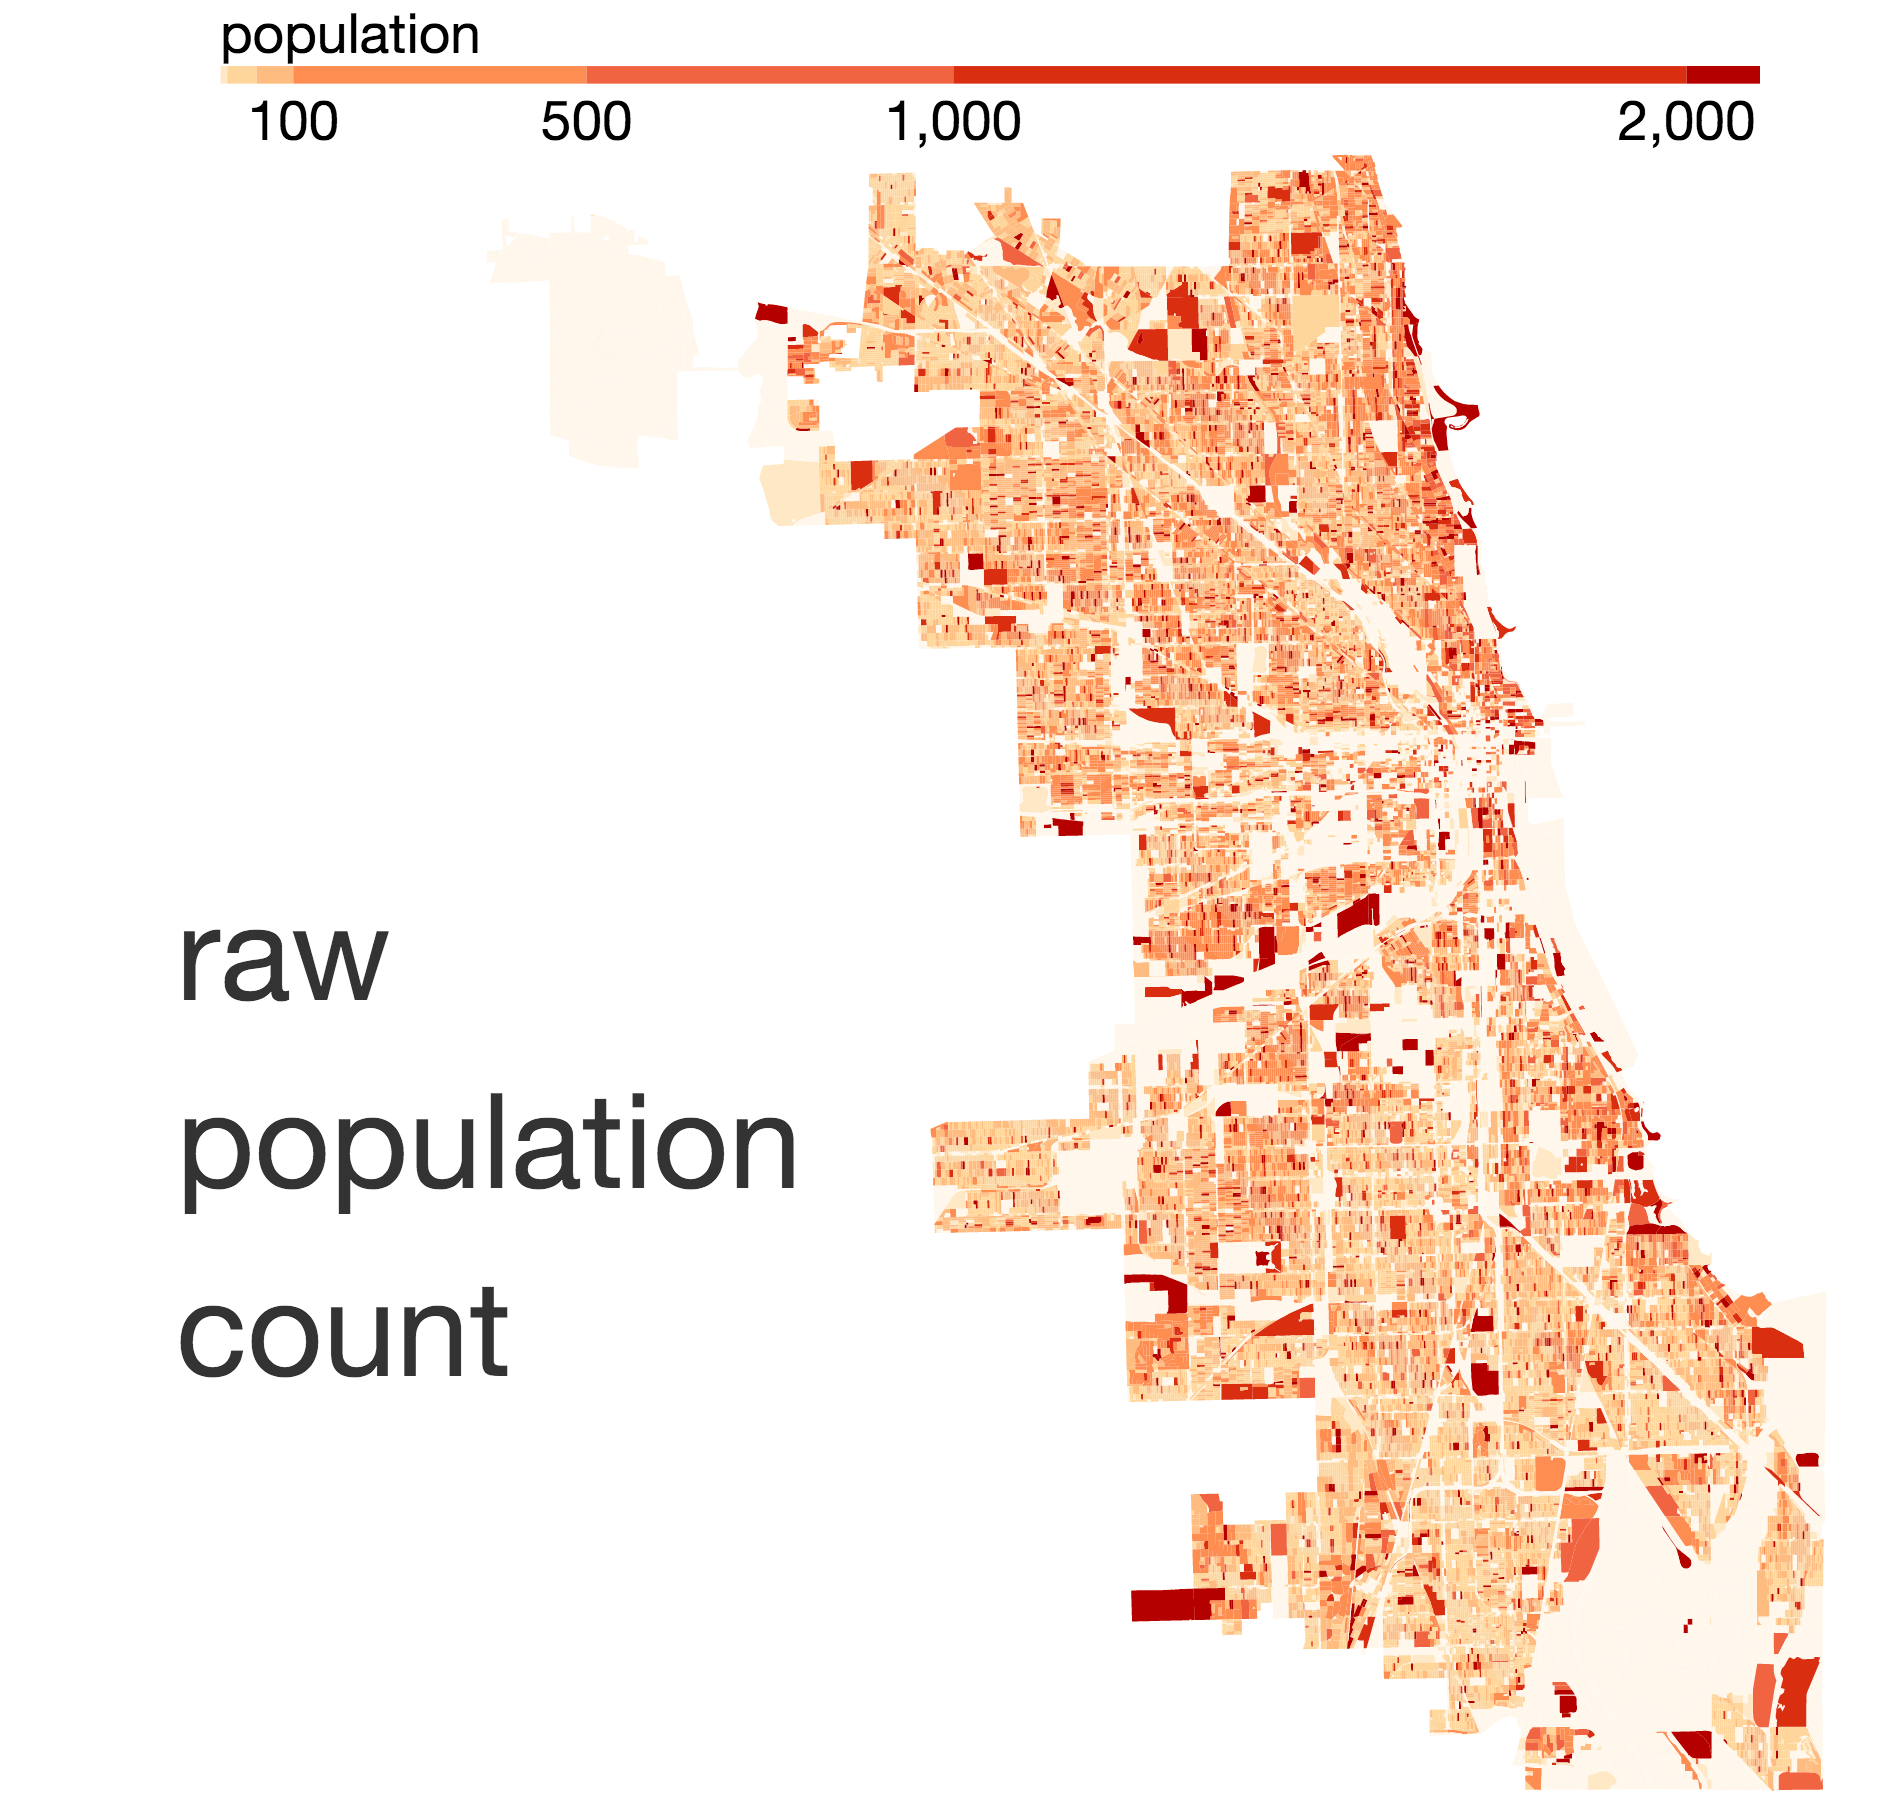 Chicago's Population (Raw Count)